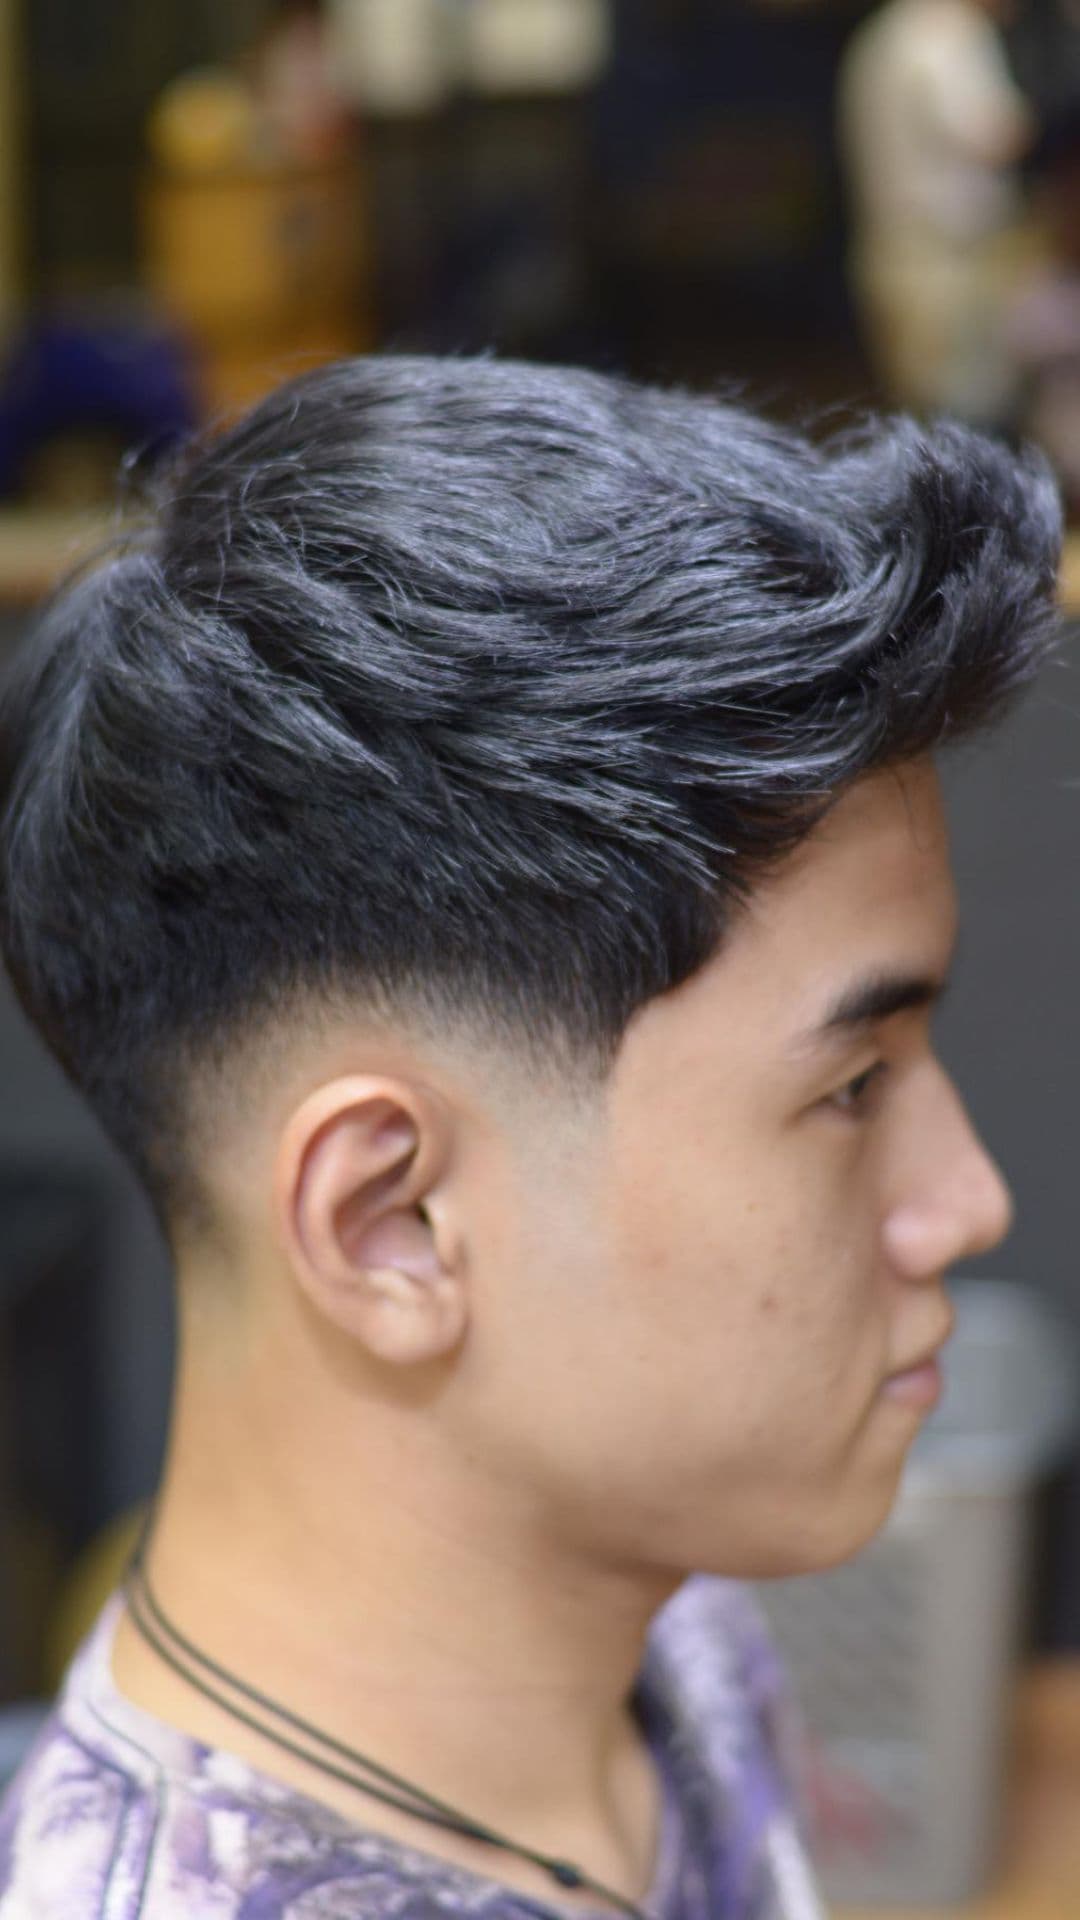 A man with textured spikes haircut.